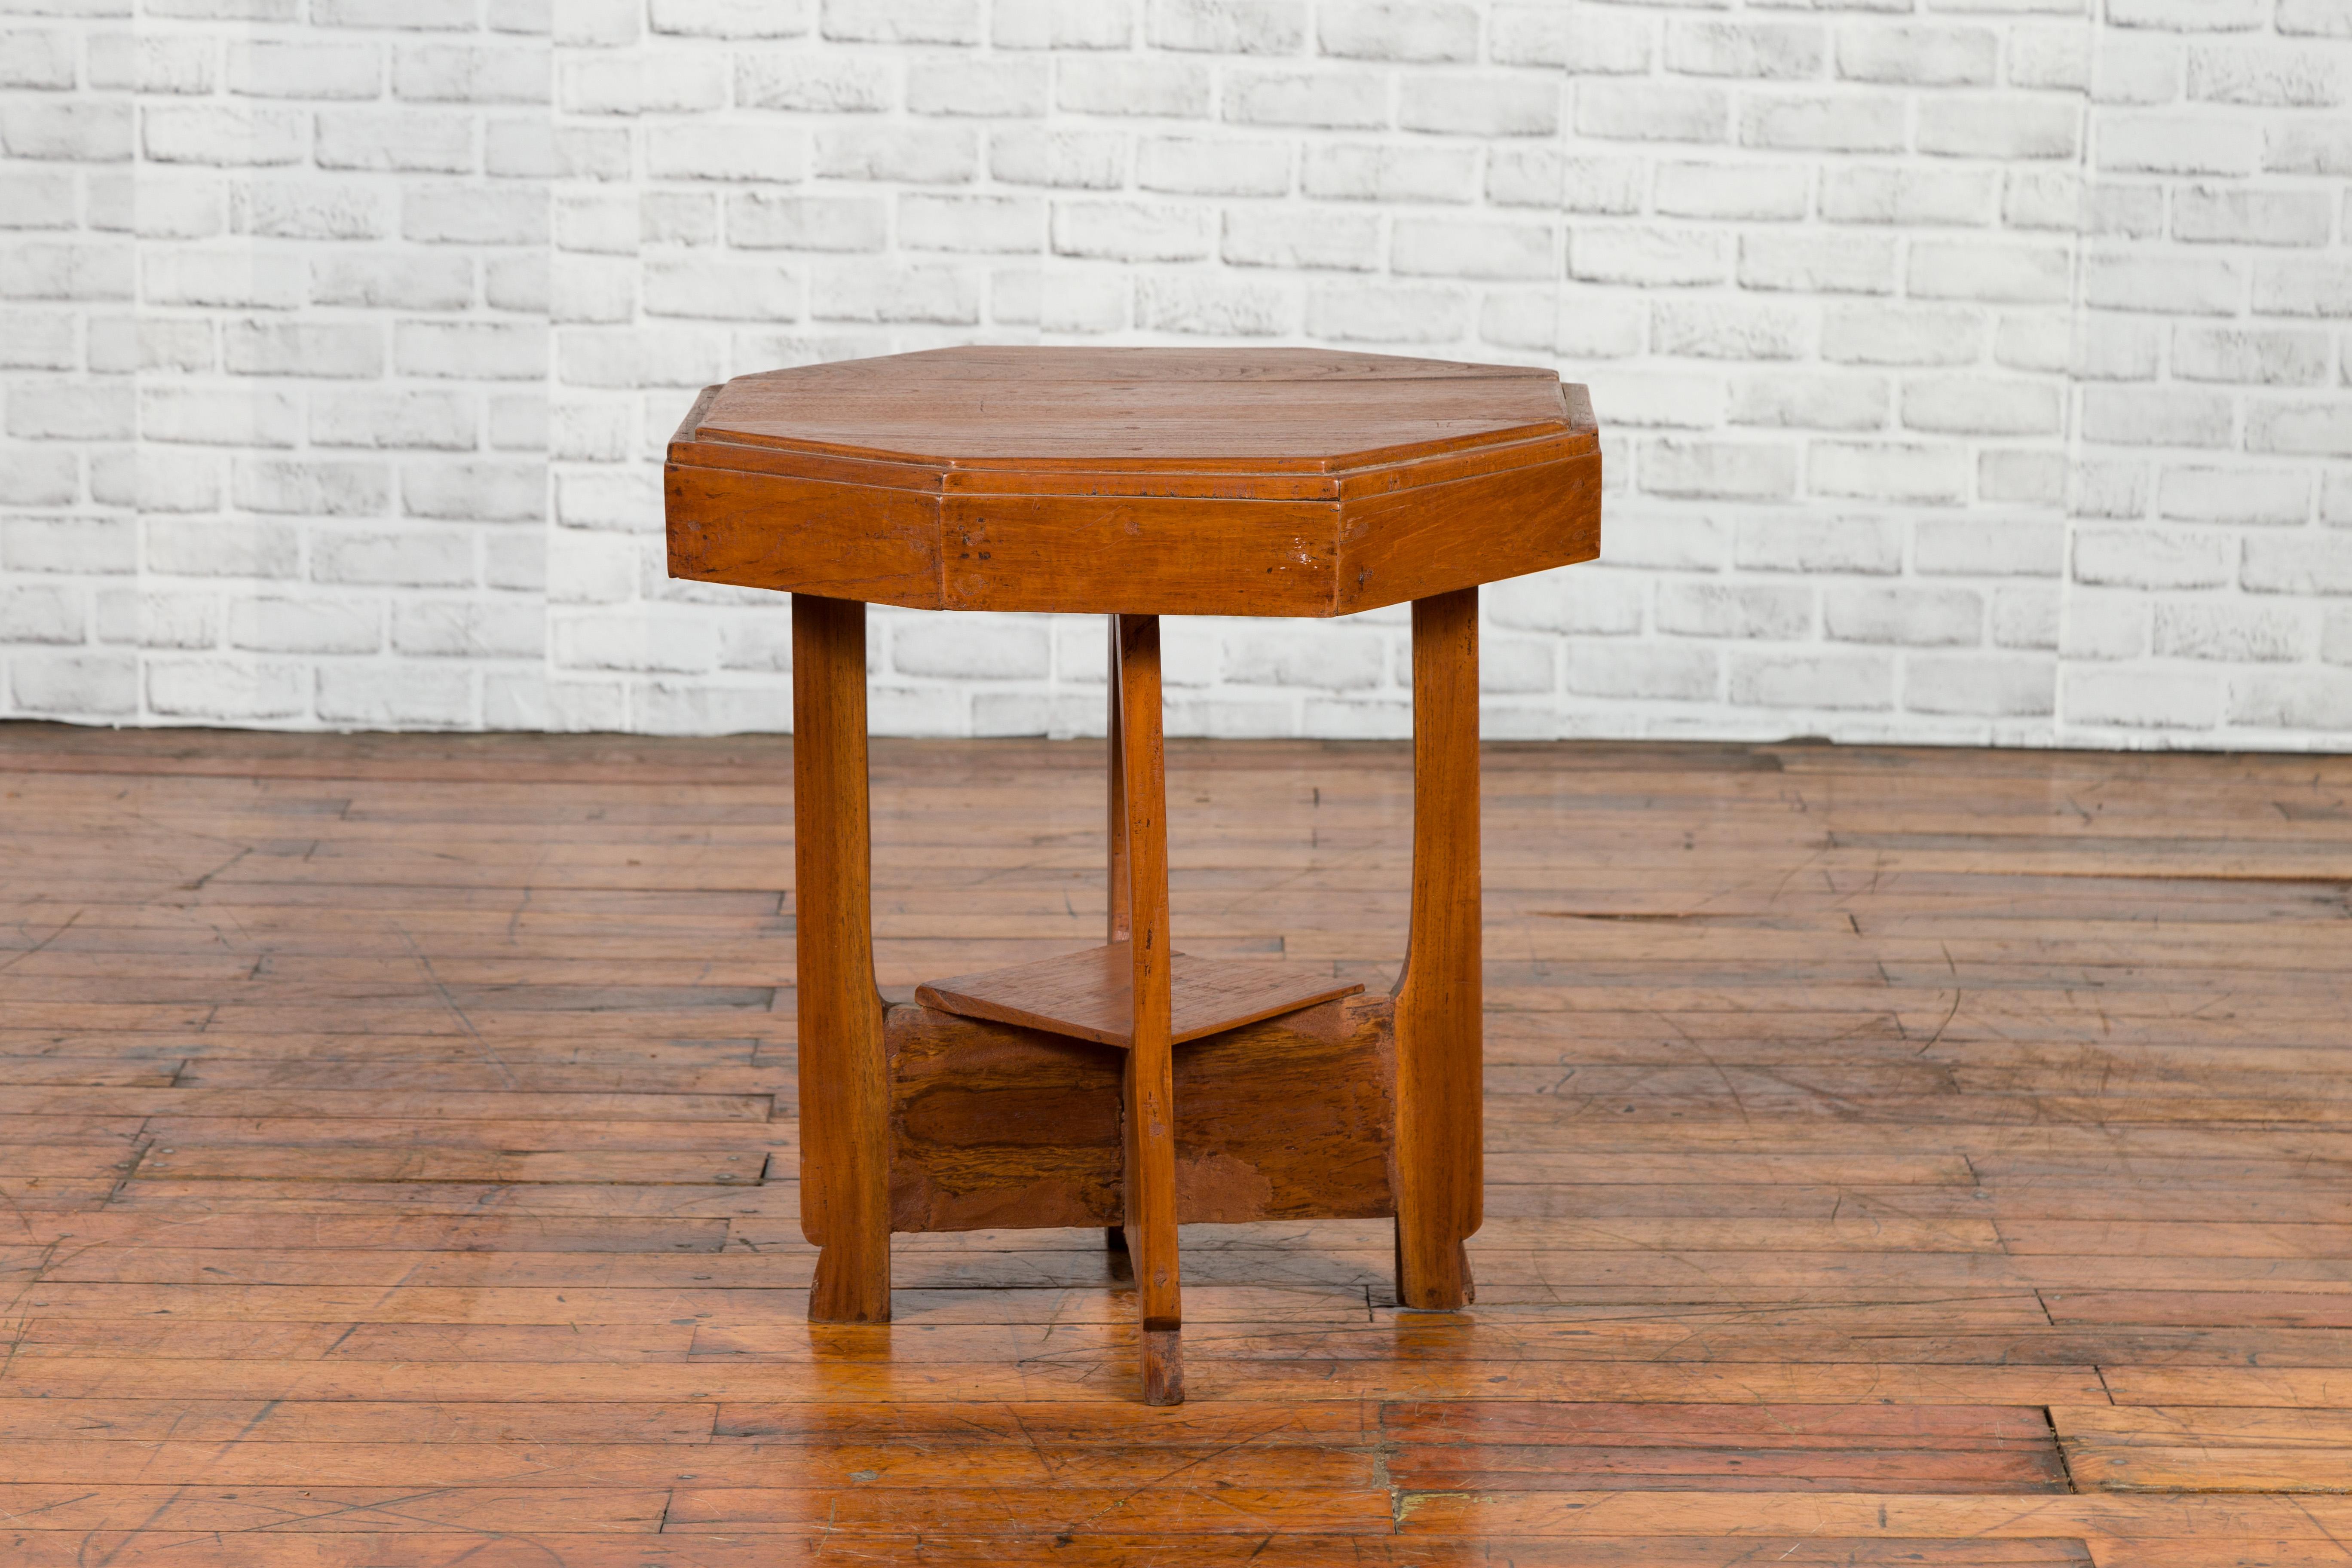 A Javanese teak Art Deco style table from the mid 20th century with octagonal top, beveled accents and lower shelf. Created in Java during the midcentury period, this vintage teak Art Deco table features an octagonal, slightly raised top, sitting